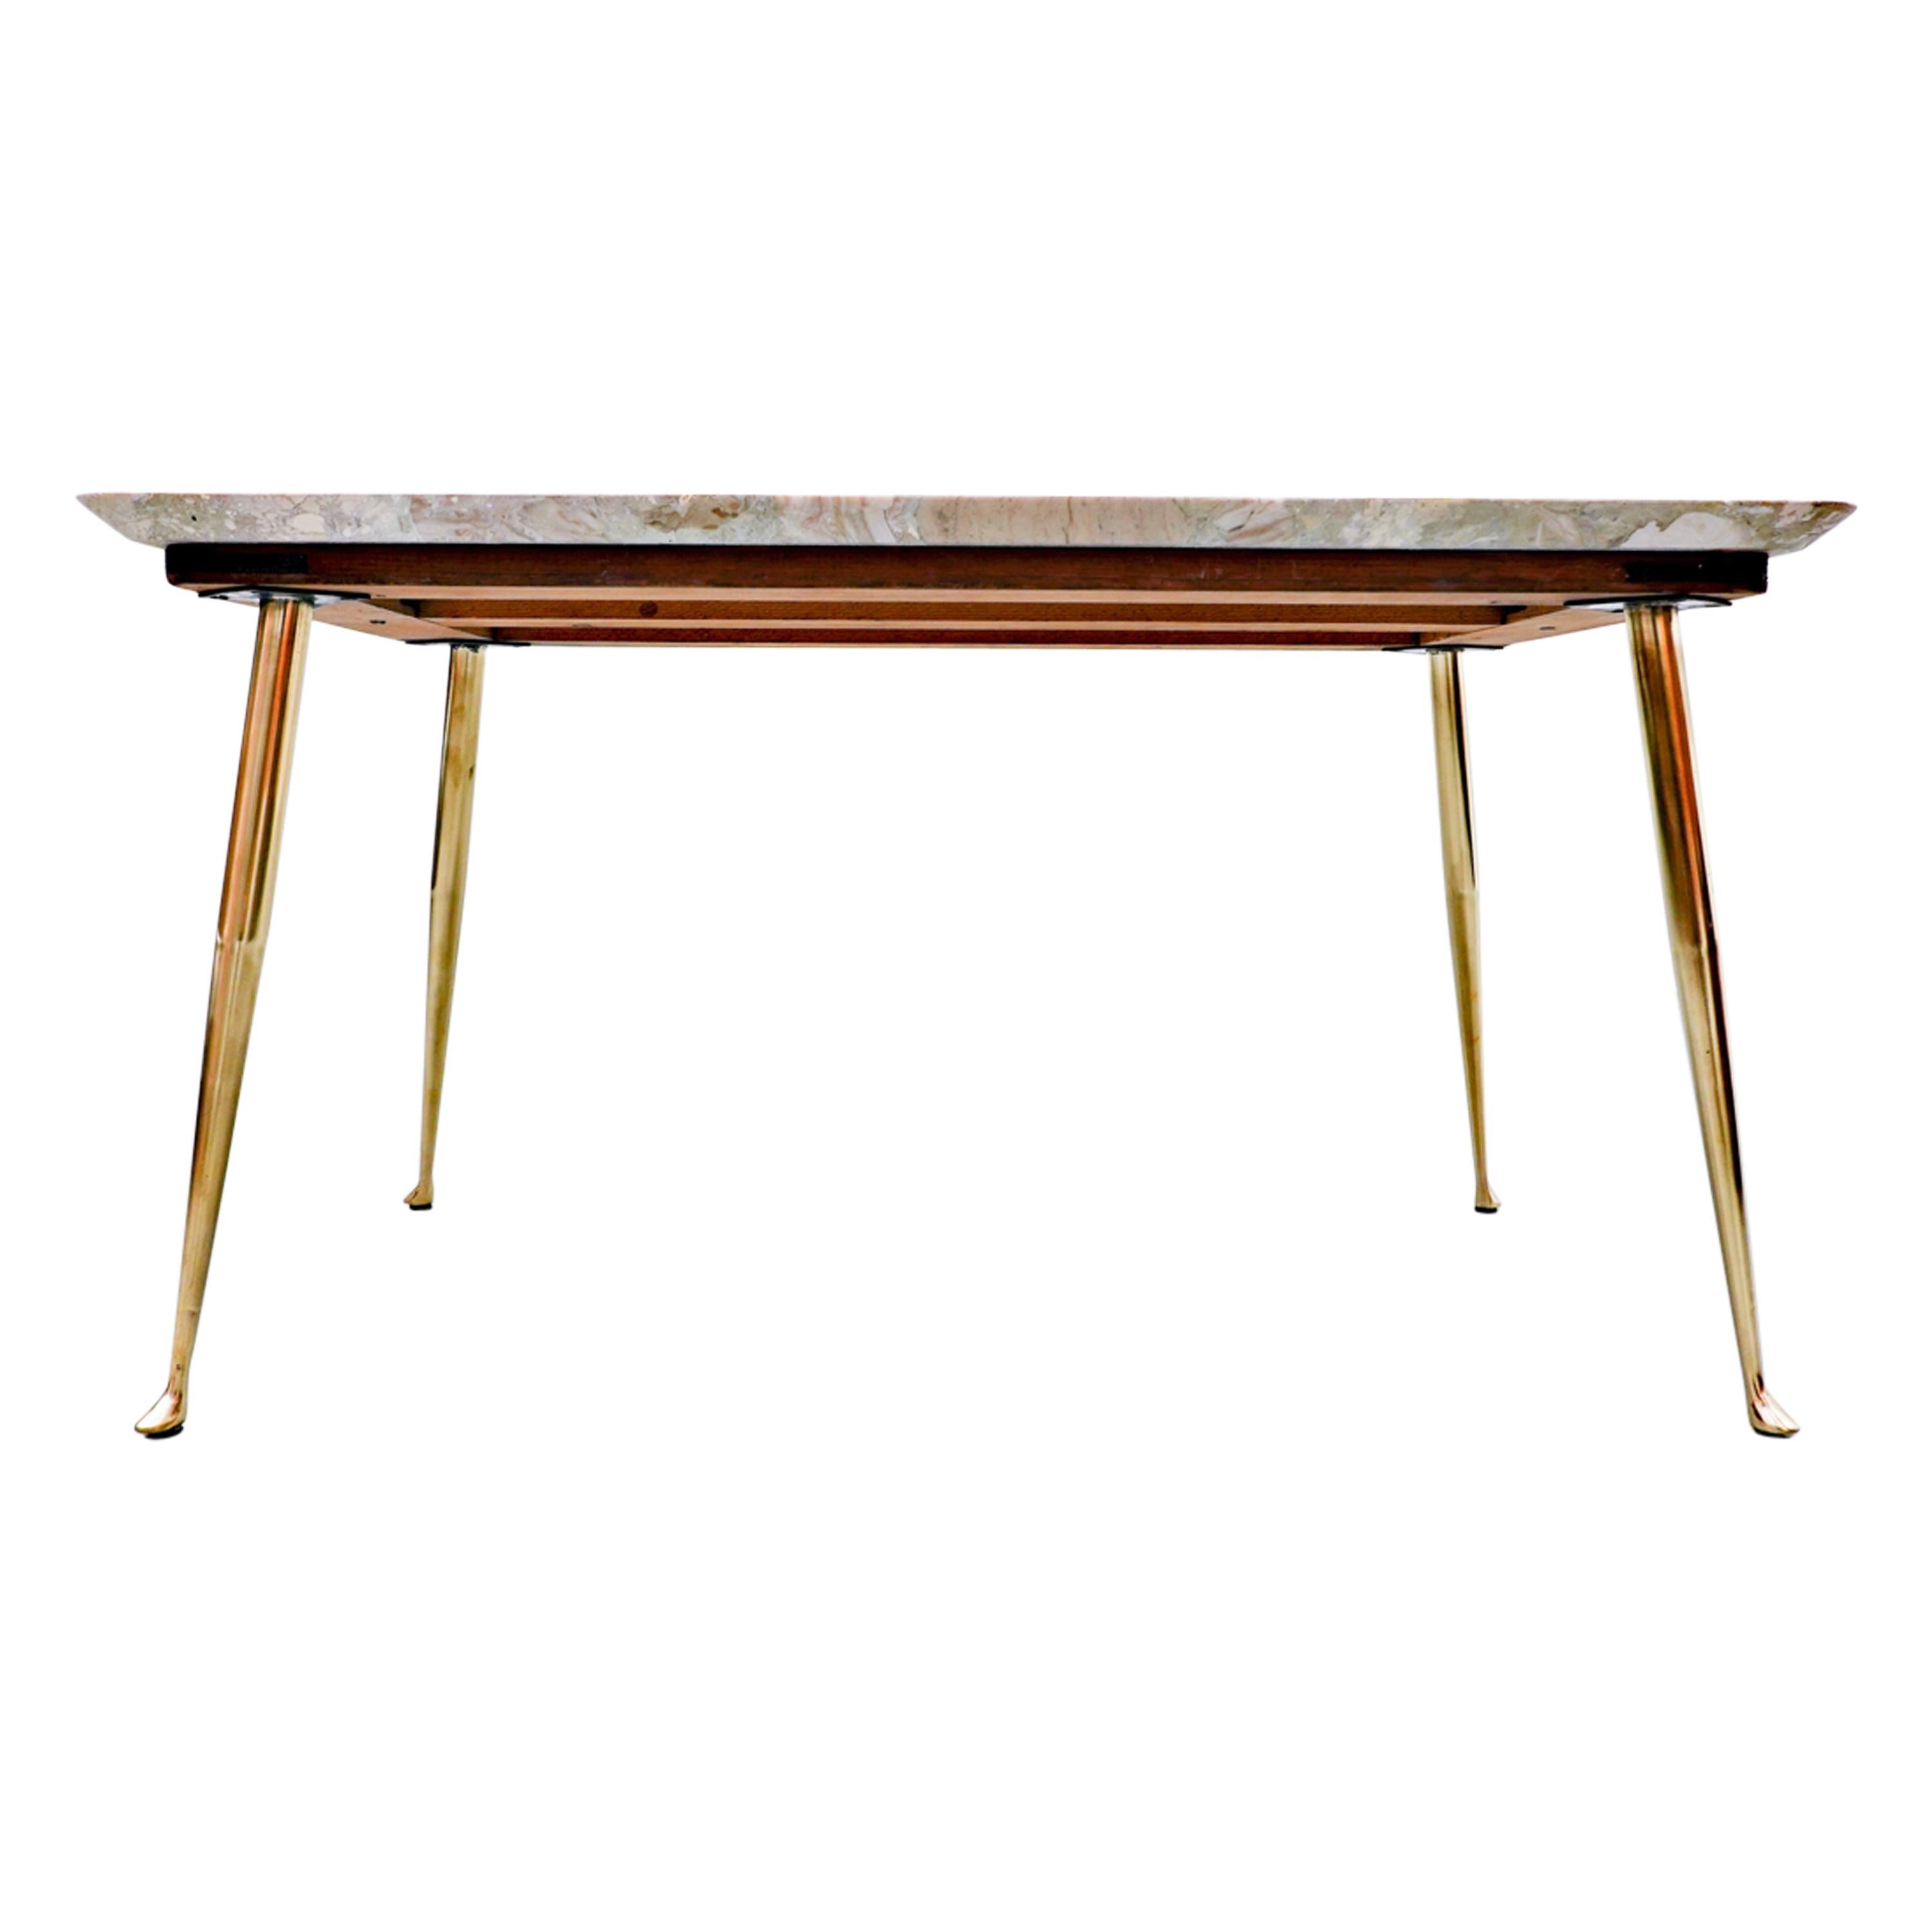 Mid-Century Modern Italian Side Table, Mable and Brass, 1960s